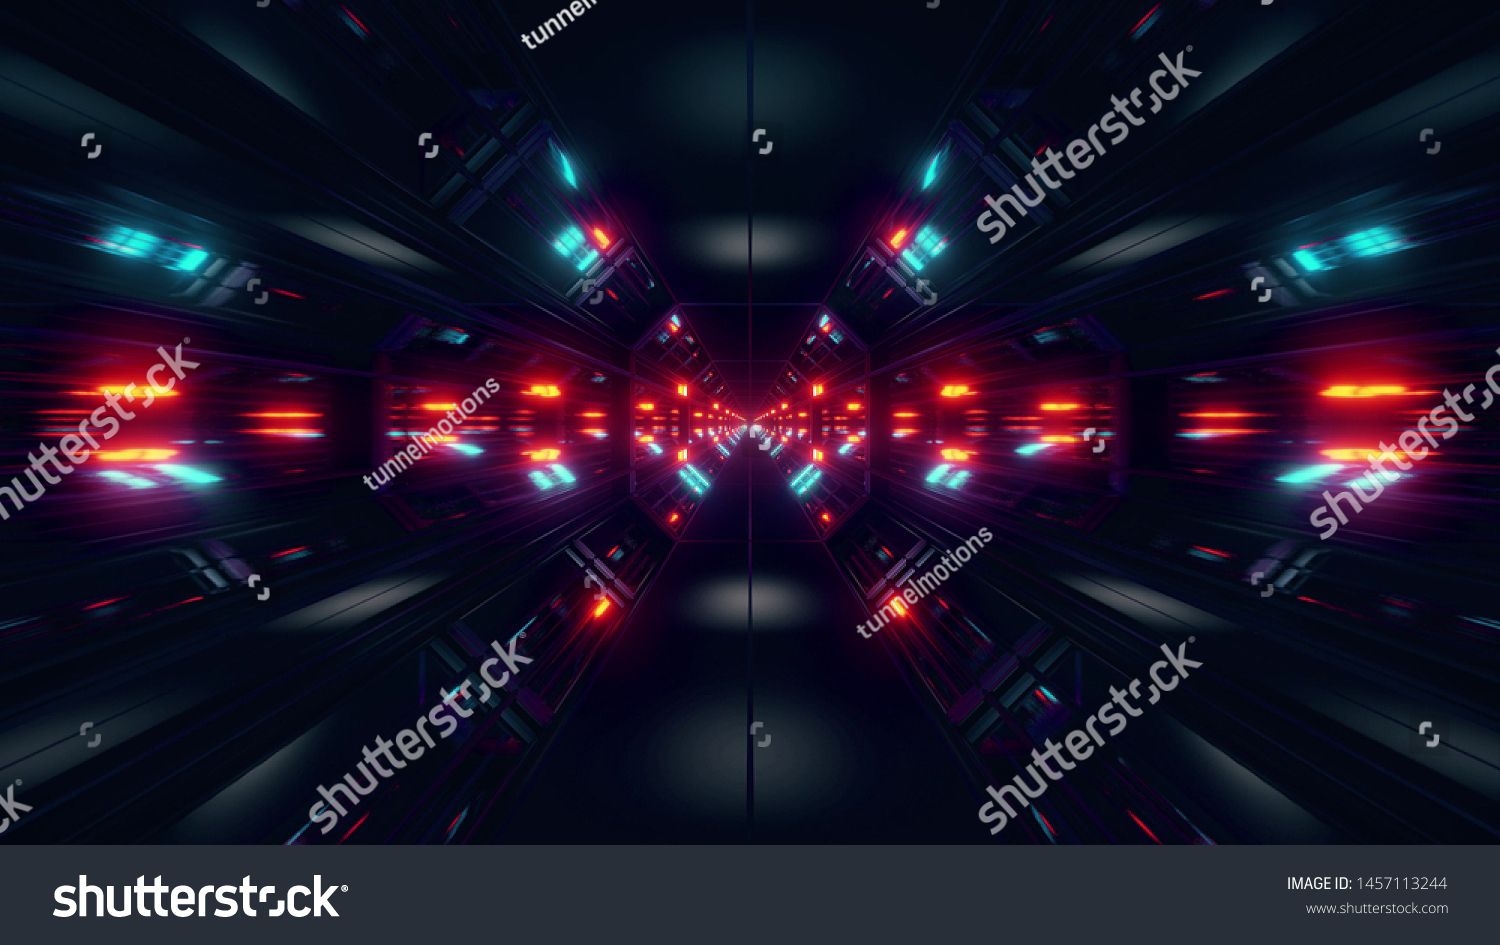 A Space Tunnel Wallpapers